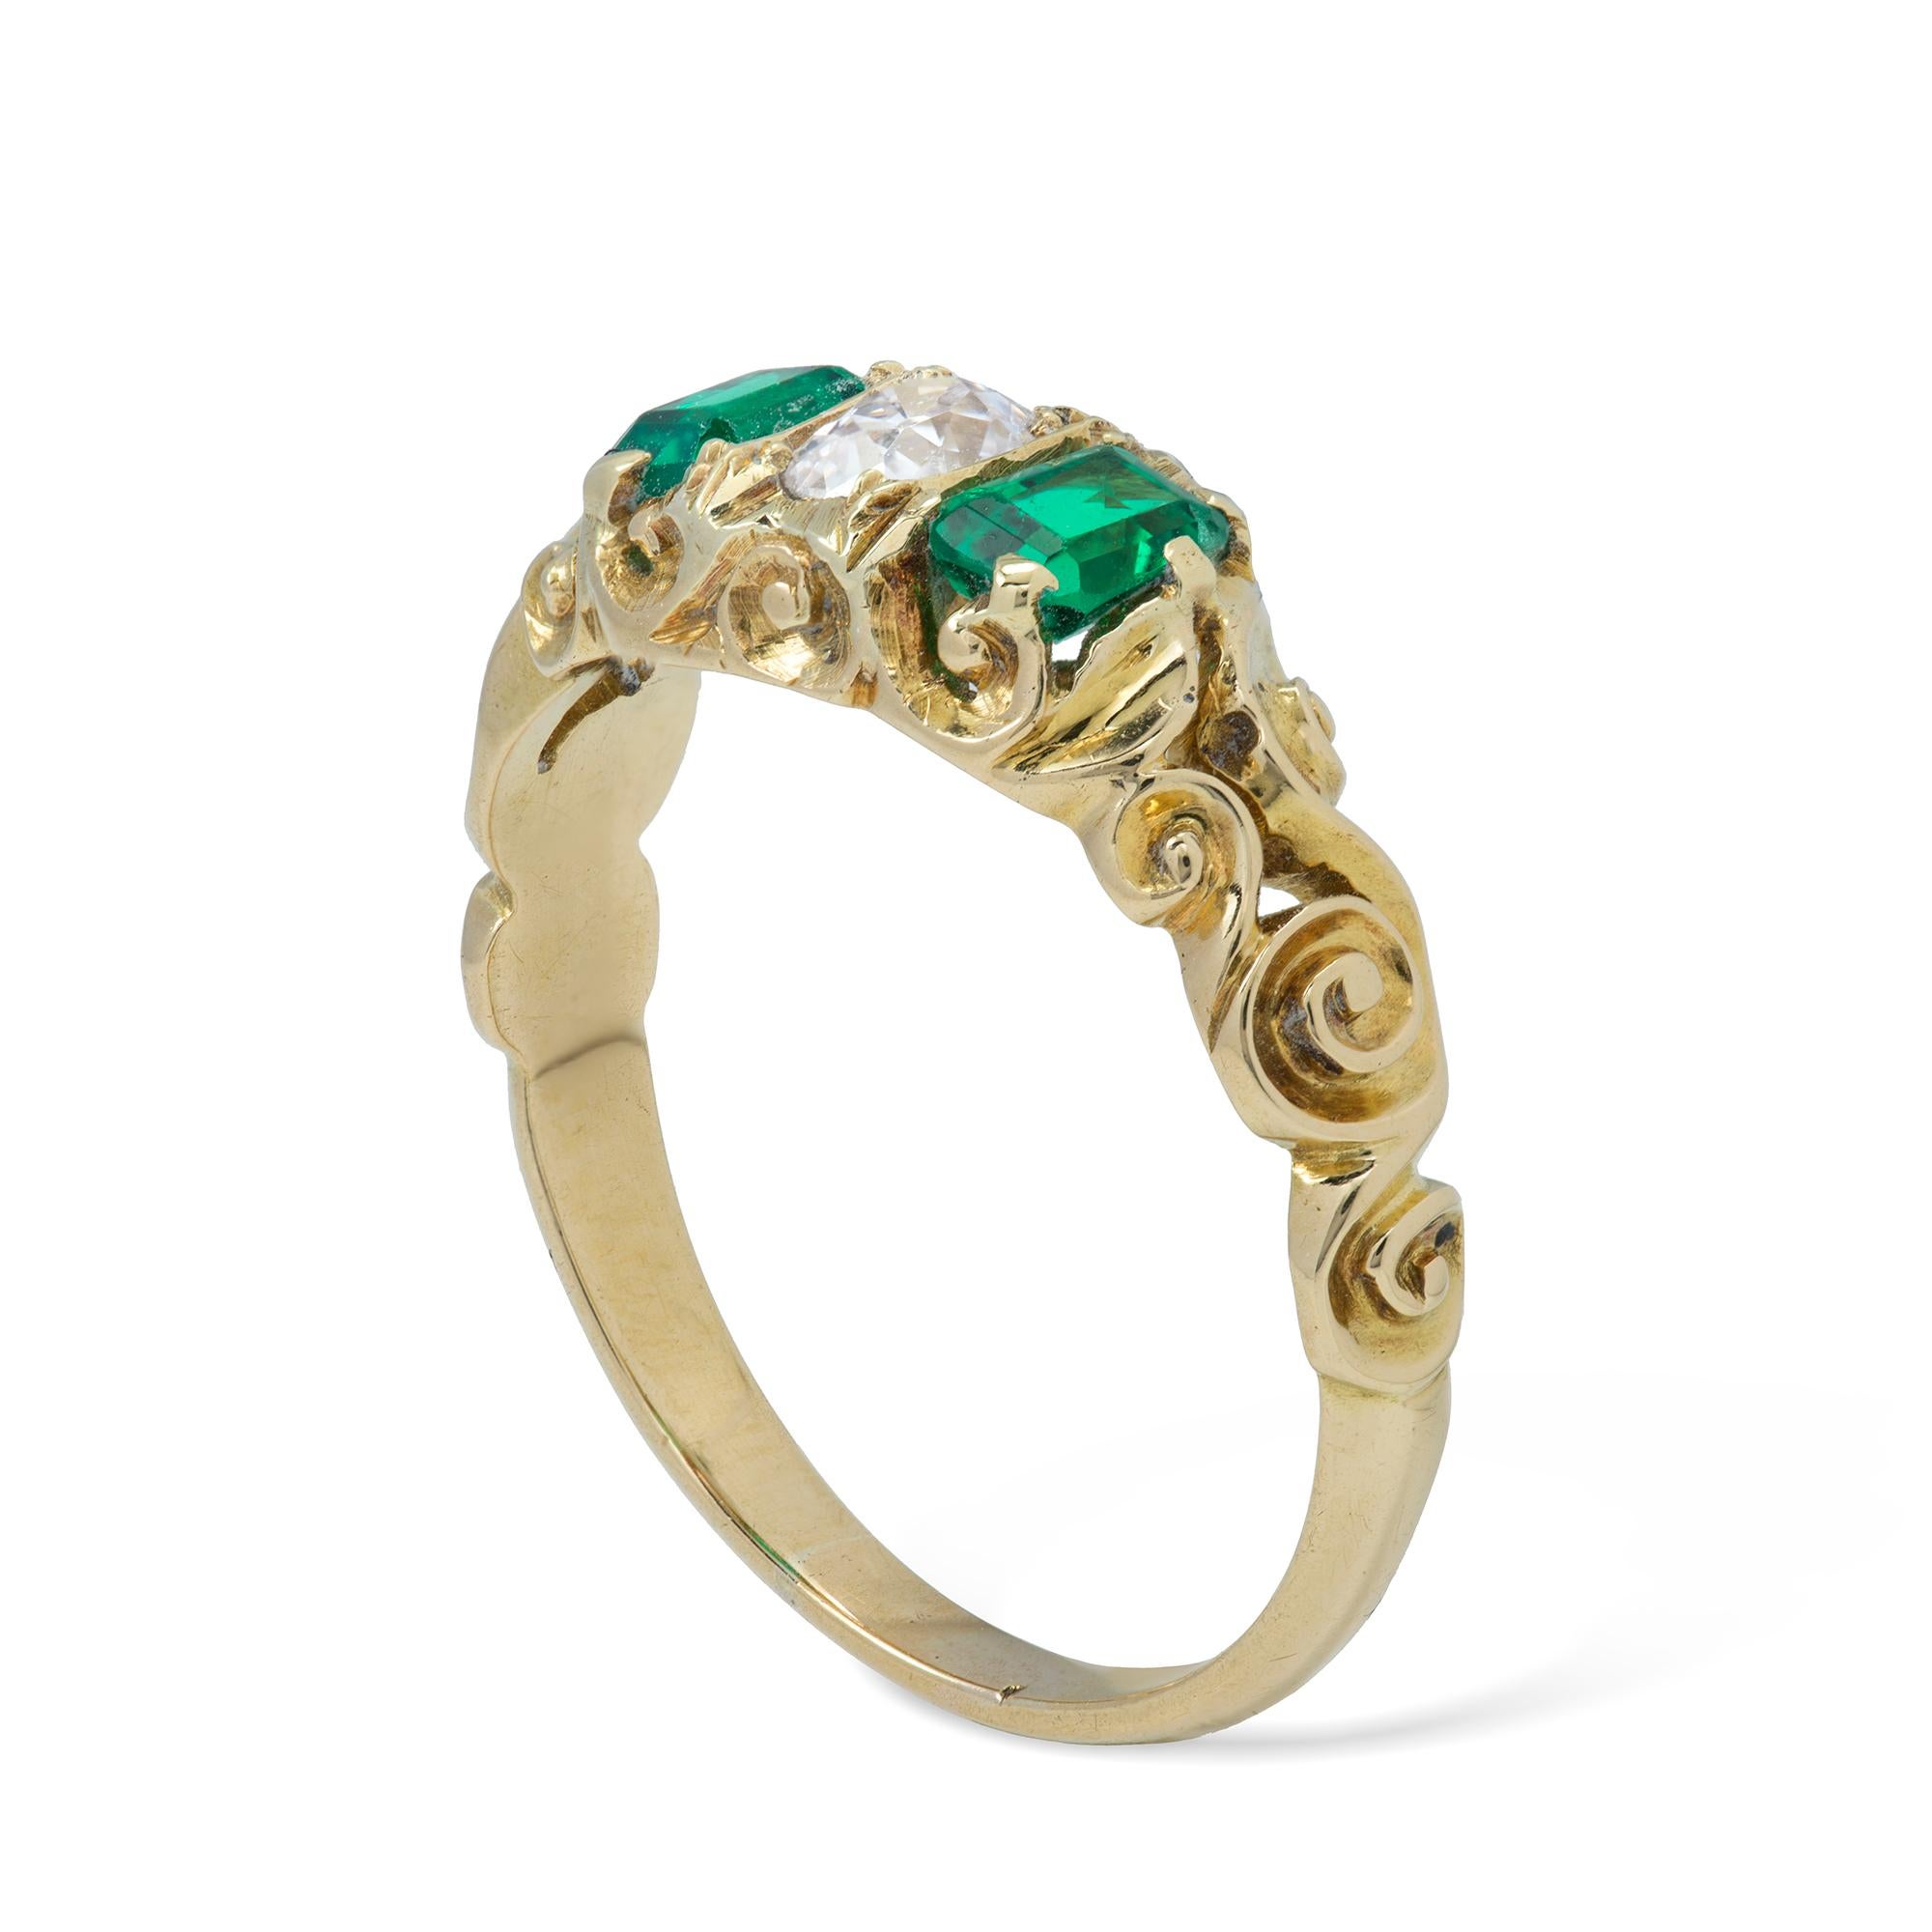 A late Victorian emerald and diamond three stone ring, the oval-cut diamond weighing approximately 0.30 carats set between two emerald-cut emeralds, weighing approximately a total of 0.60 carats, all se in a yellow gold carved mount with scroll